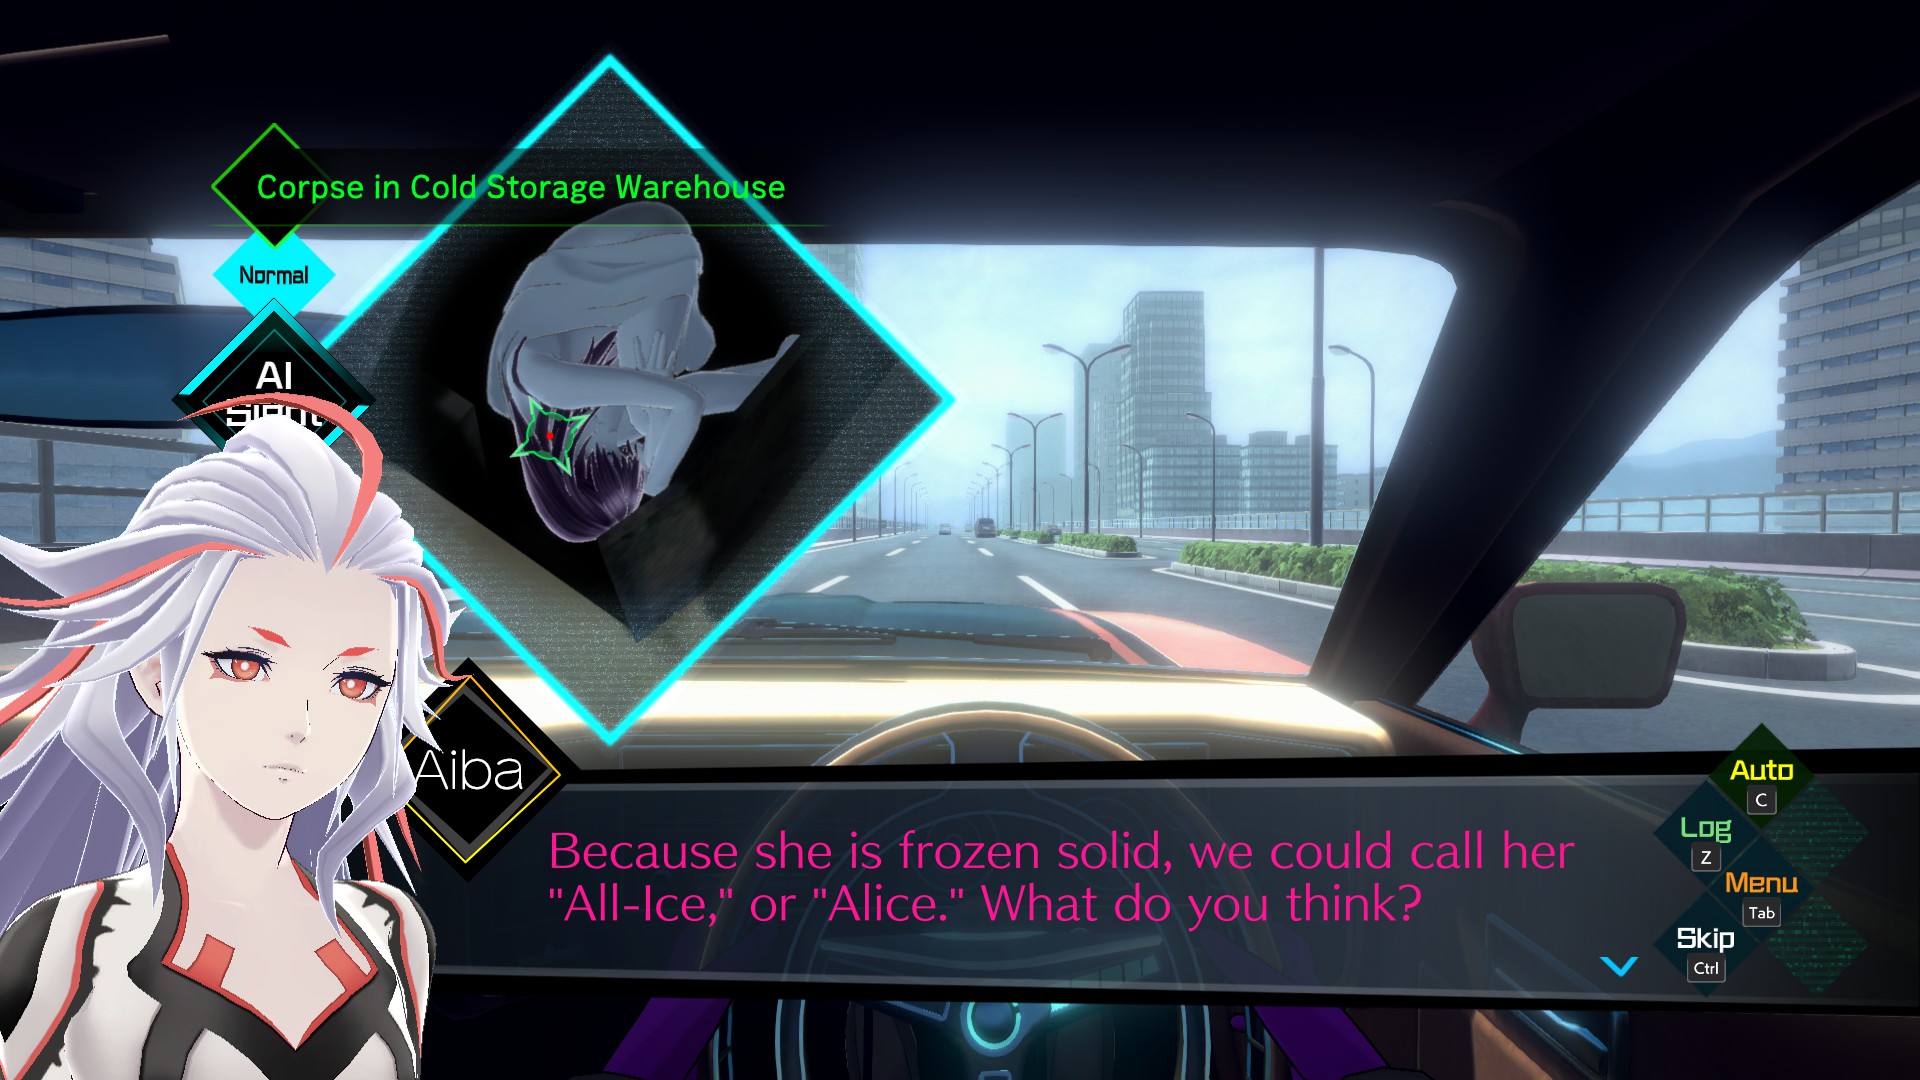 A screenshot of AI: The Somnium Files. Aiba says "Because she is frozen solid, we could call her 'All-Ice,' or 'Alice.' What do you think?"

A picture of "Alice's" (Manaka's) frozen corpse is shown in the corner. This is a reference to "All-Ice" / "Alice" from Zero Escape.
